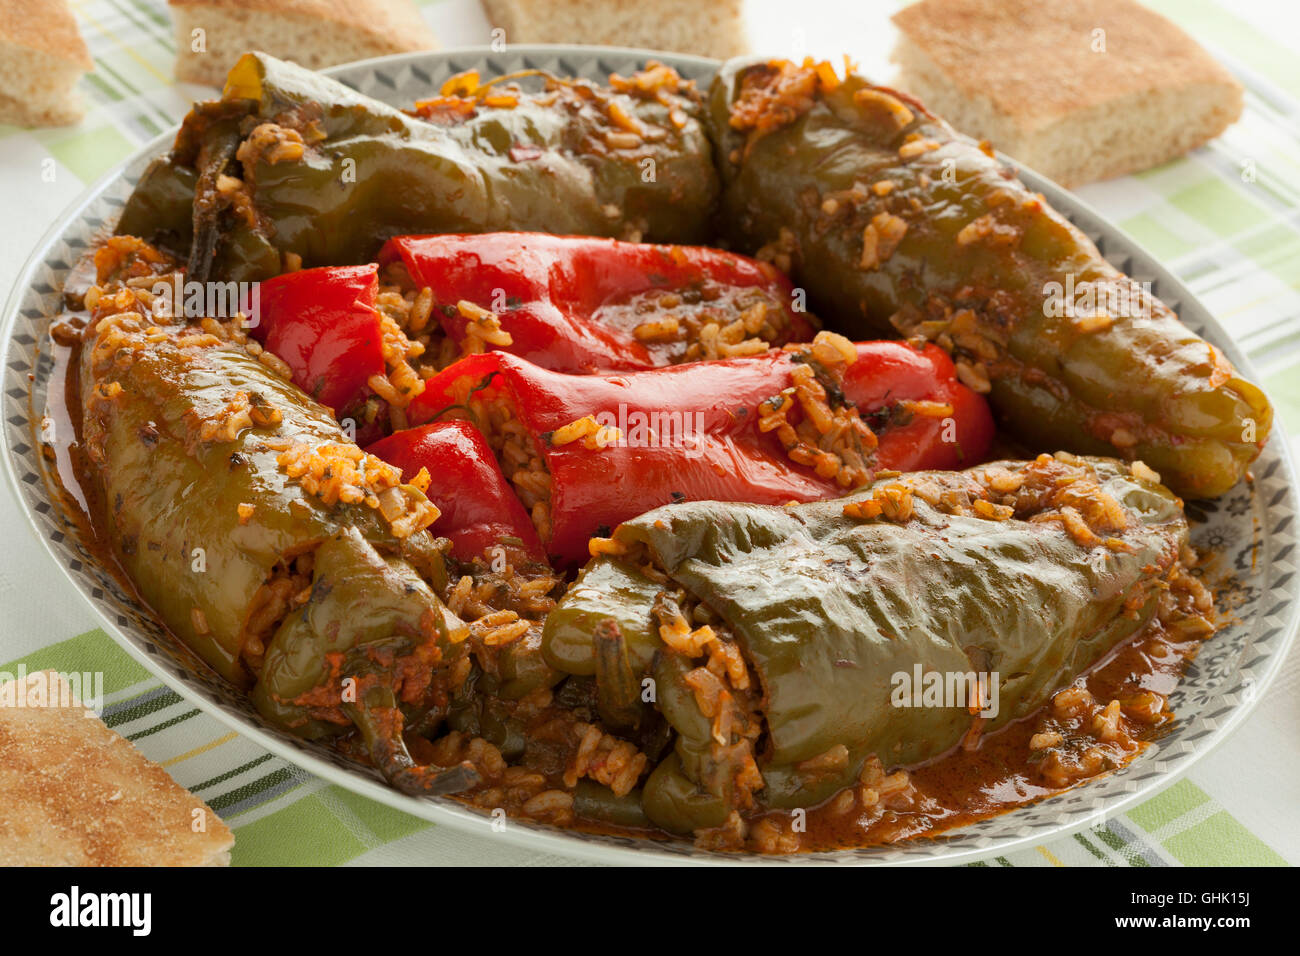 Traditional Moroccan dish with stuffed bell peppers and rice Stock Photo